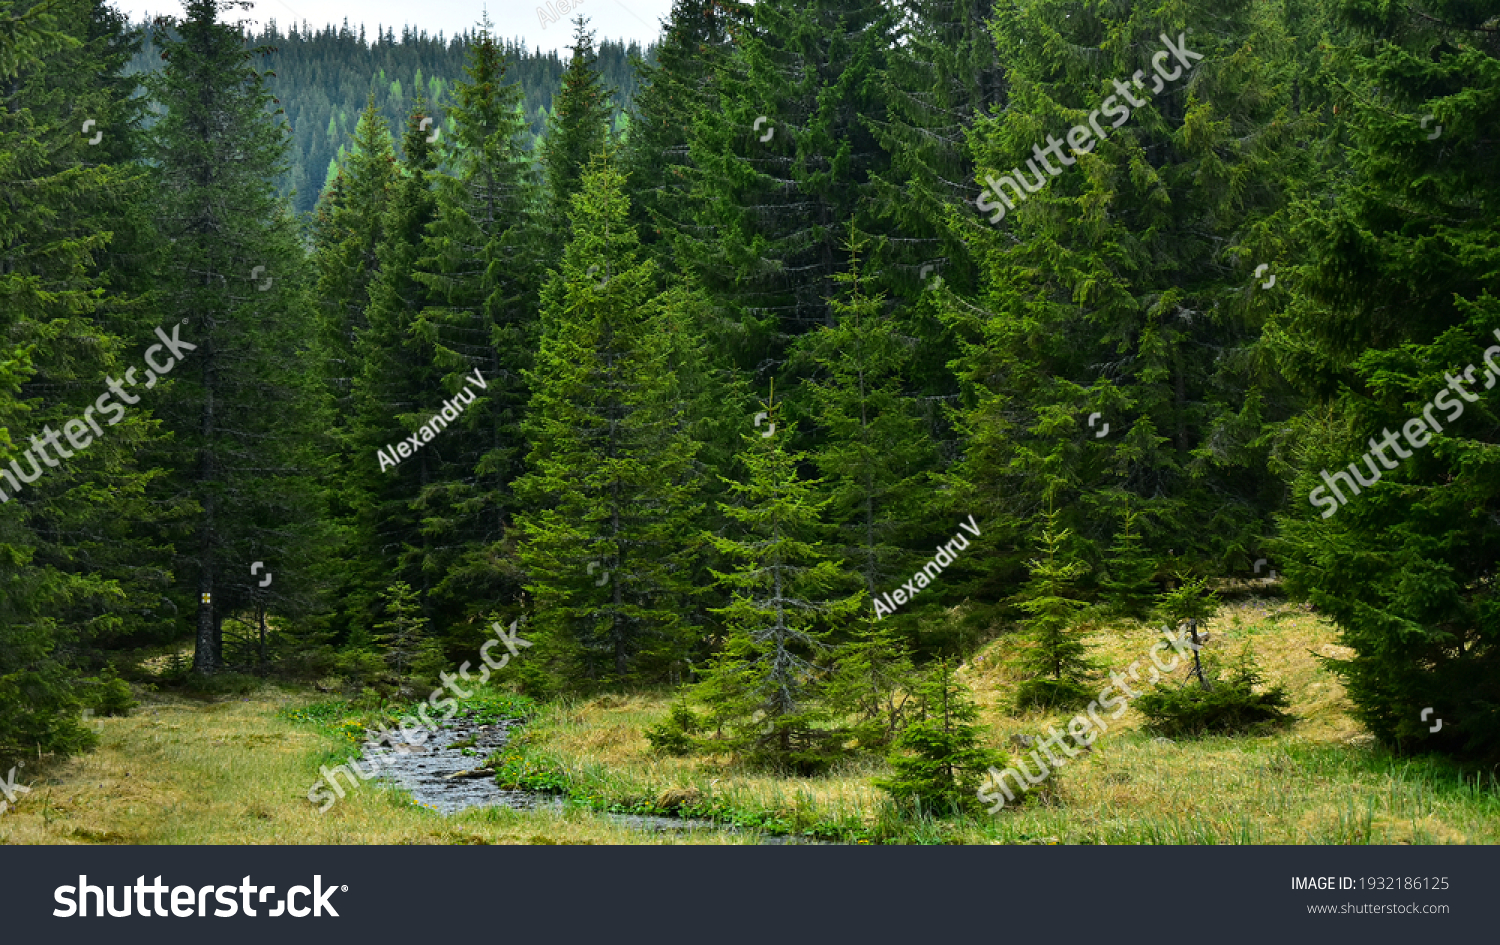 Latorita's spring gently flowing through an alpine pasture and a wild spruce forest. Capatanii Massif, Carpathia, Romania. #1932186125